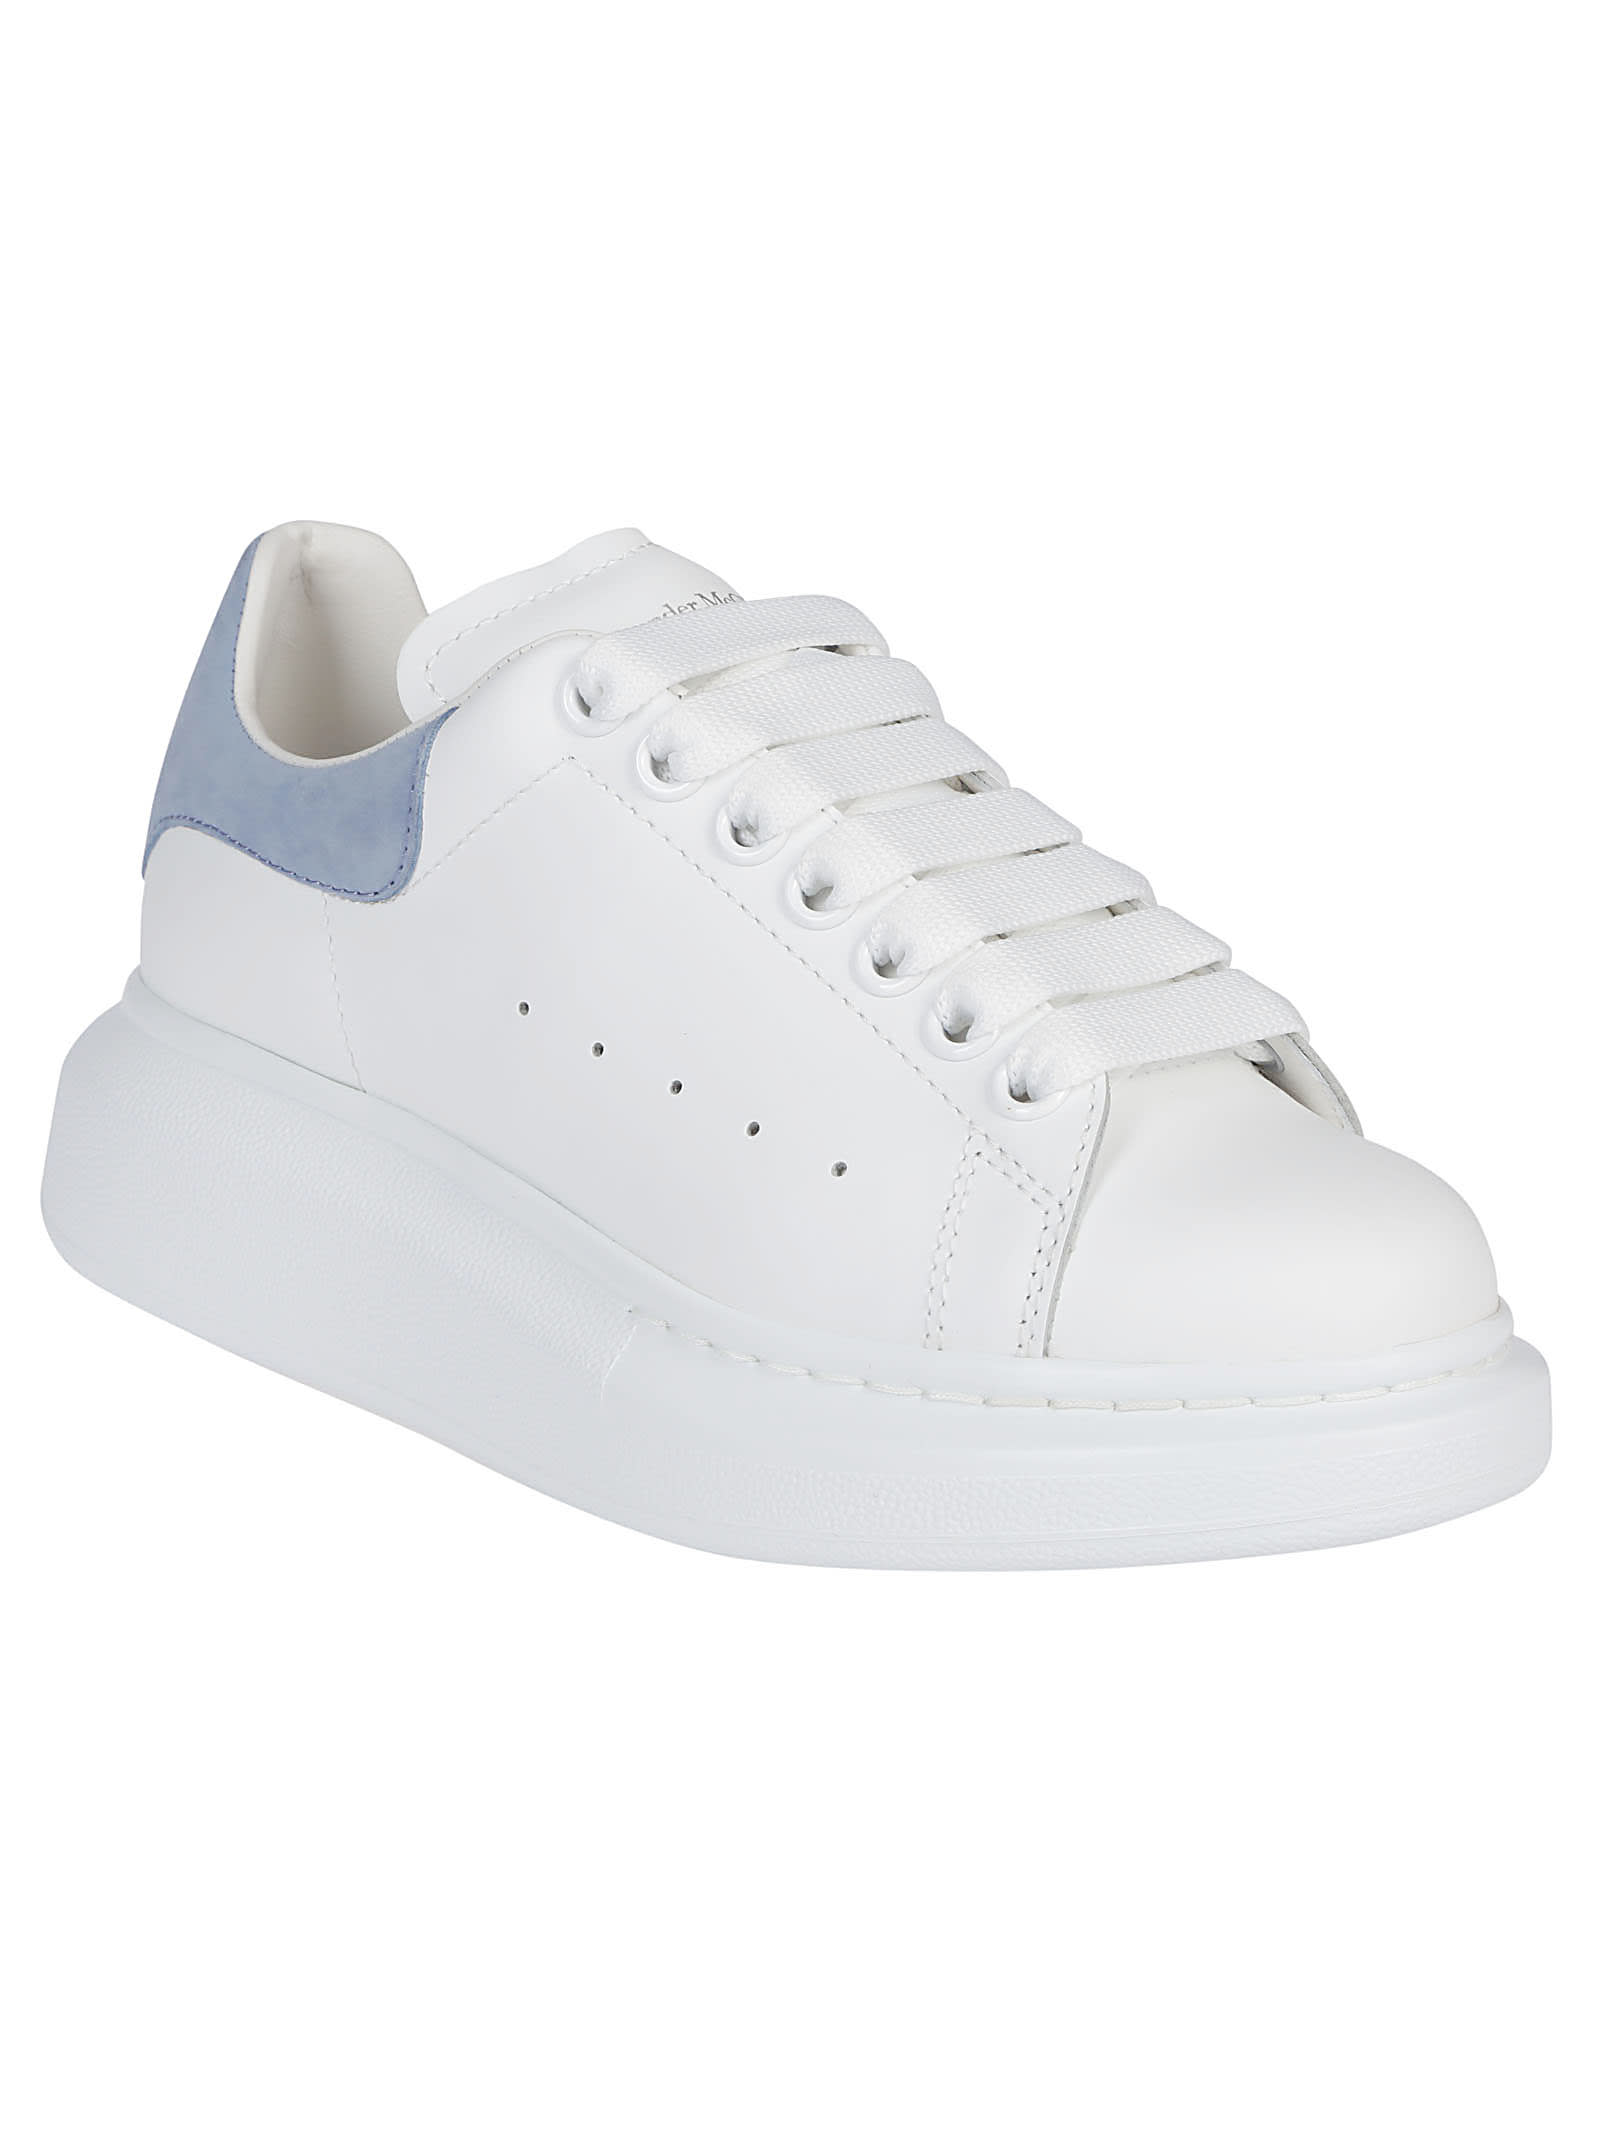 ALEXANDER MCQUEEN WHITE LEATHER OVERSIZED SNEAKERS,11789643